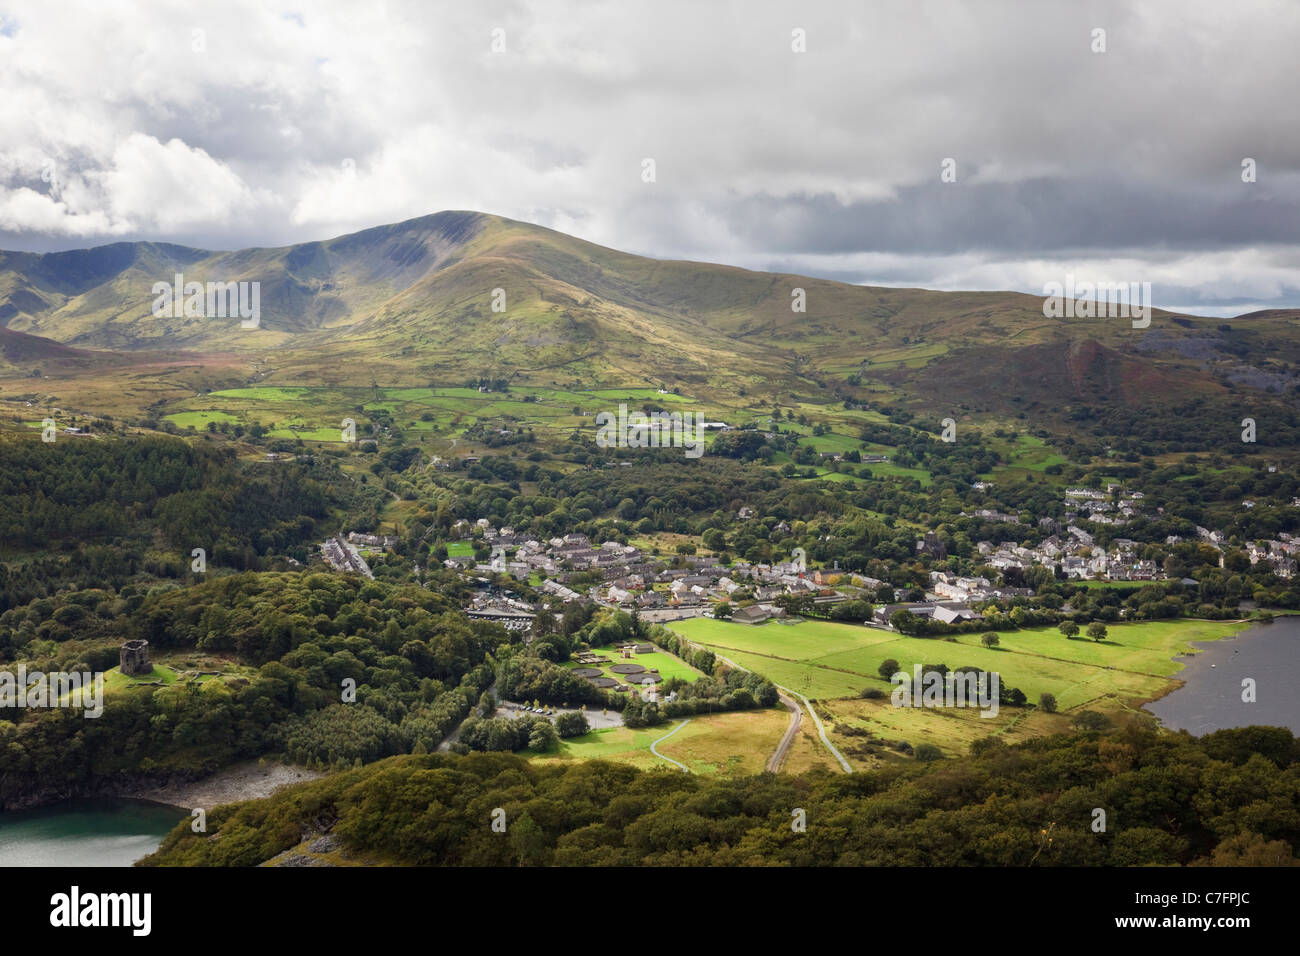 Llanberis, Gwynedd, North Wales, UK. Aerial view of Llanberis village in the mountains of Snowdonia National Park Stock Photo